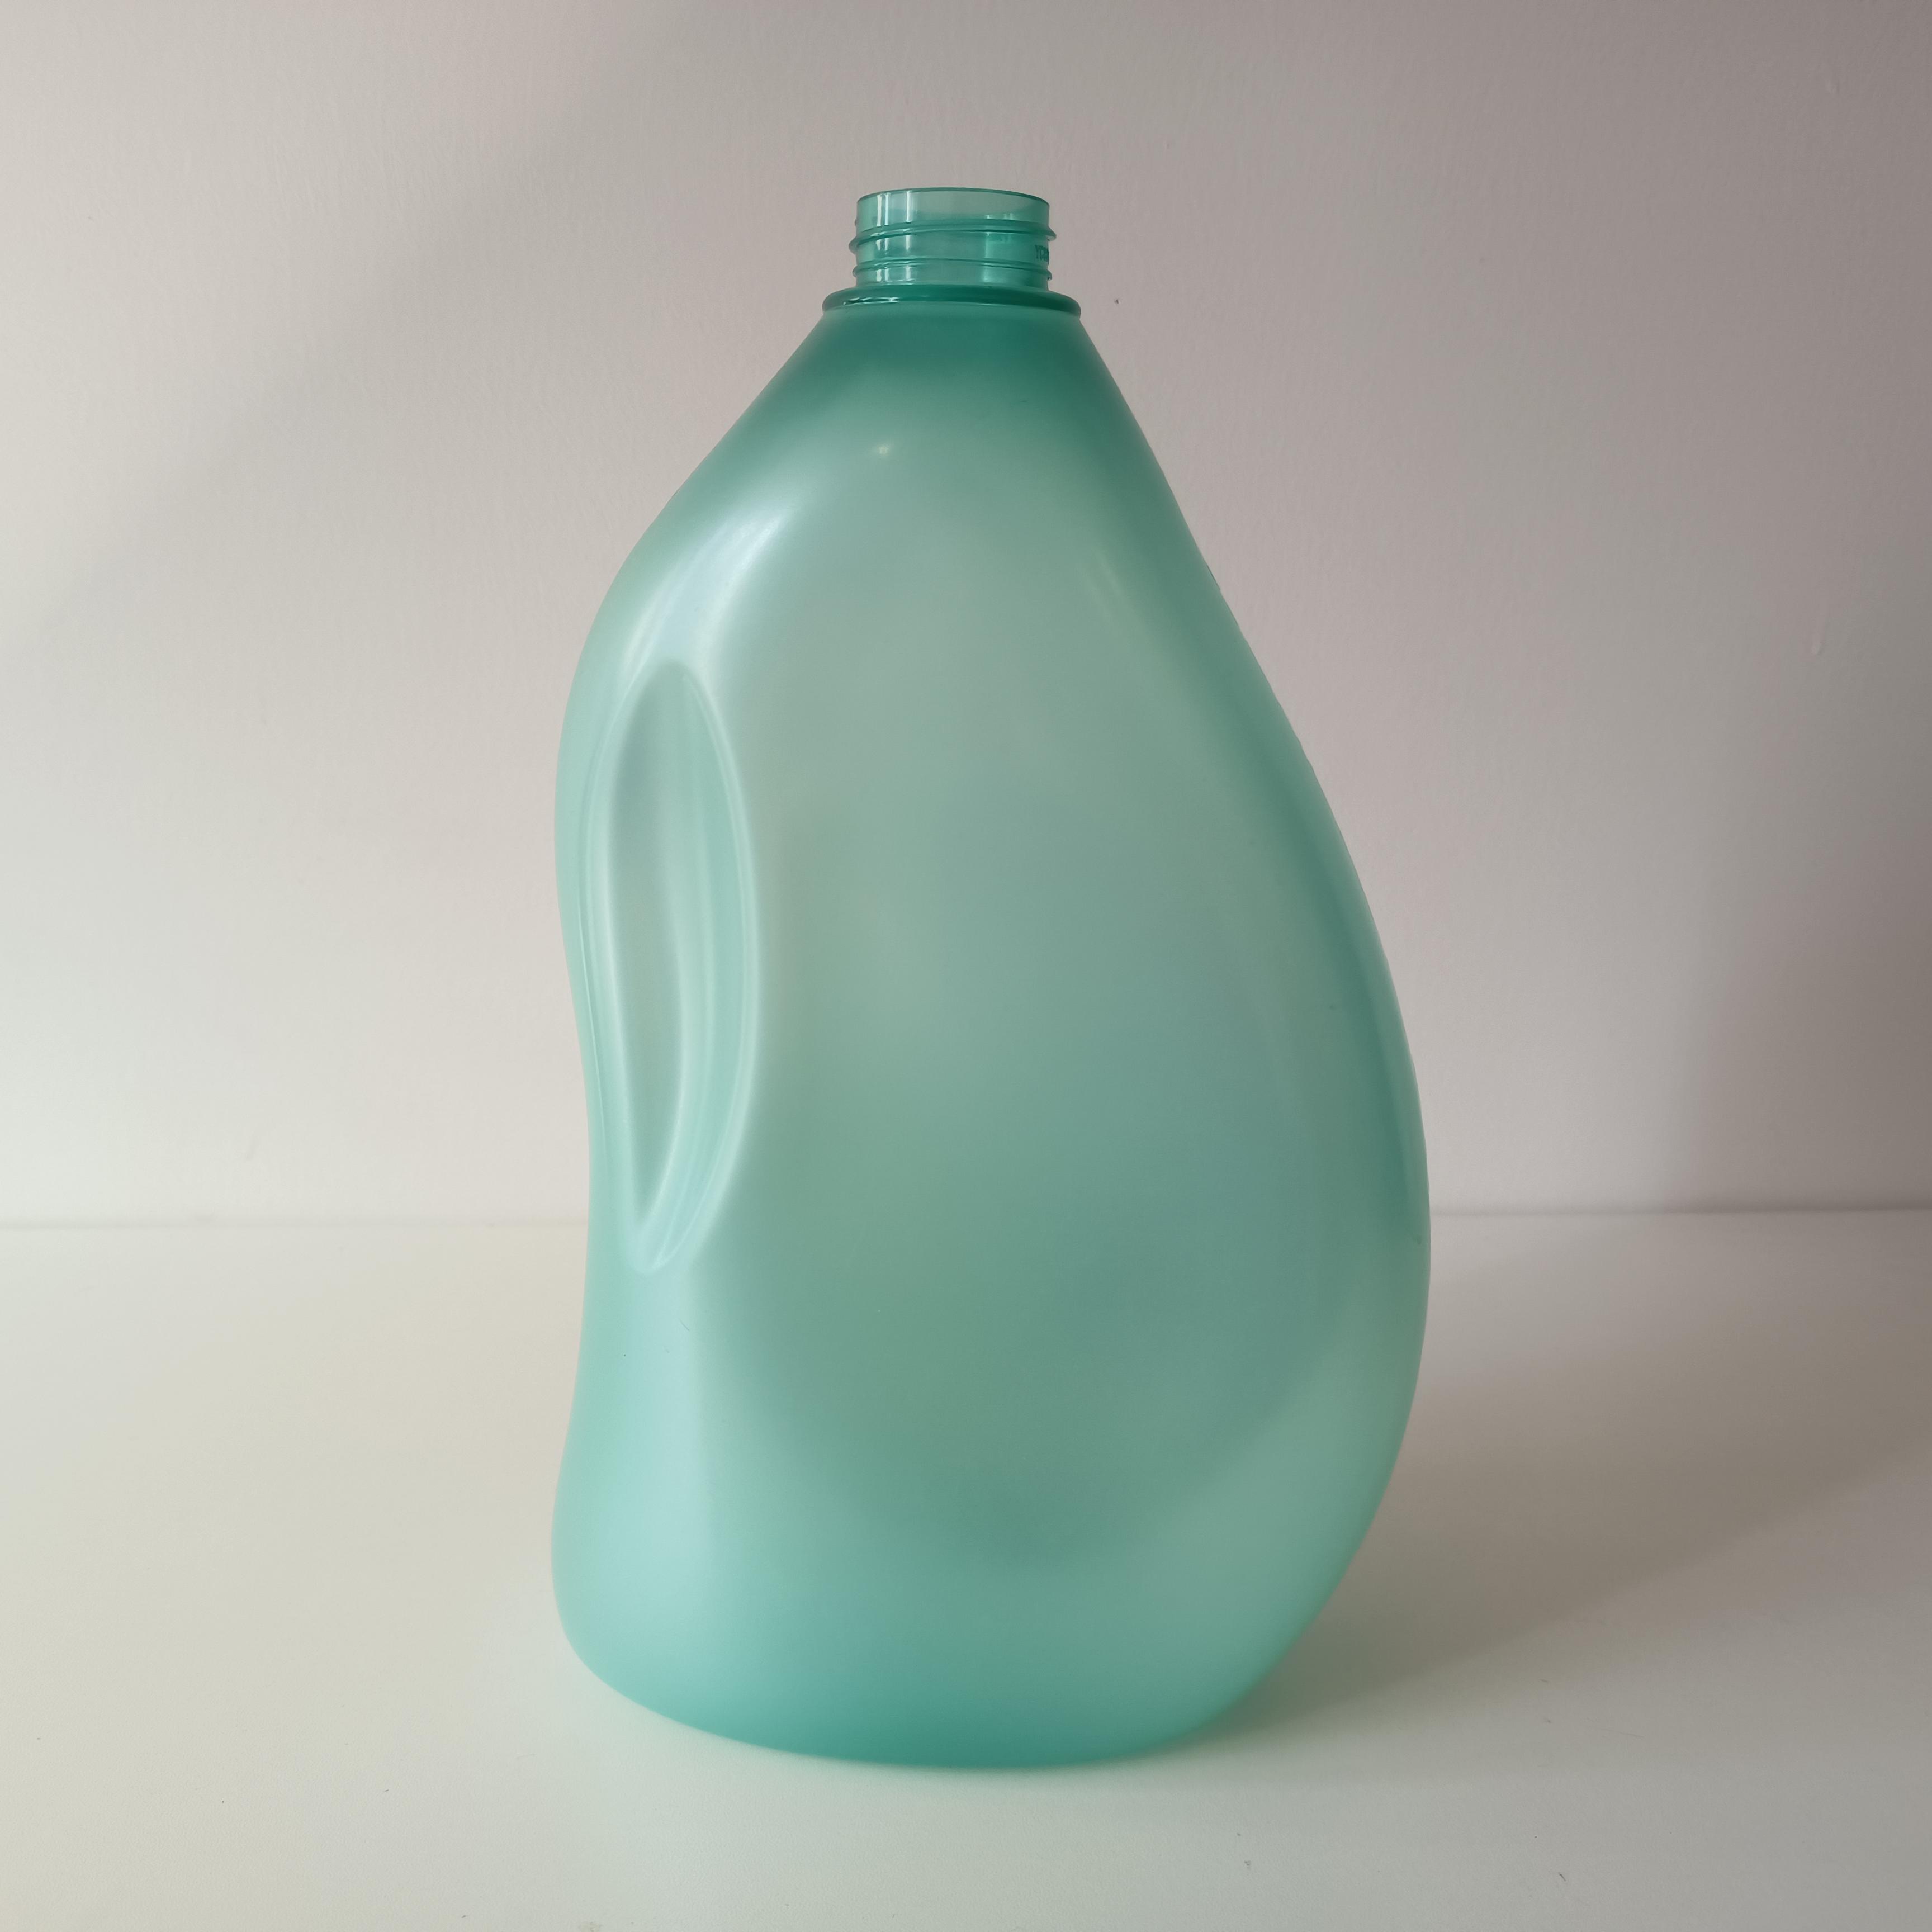 Plastic Bottles With Laundry Detergent